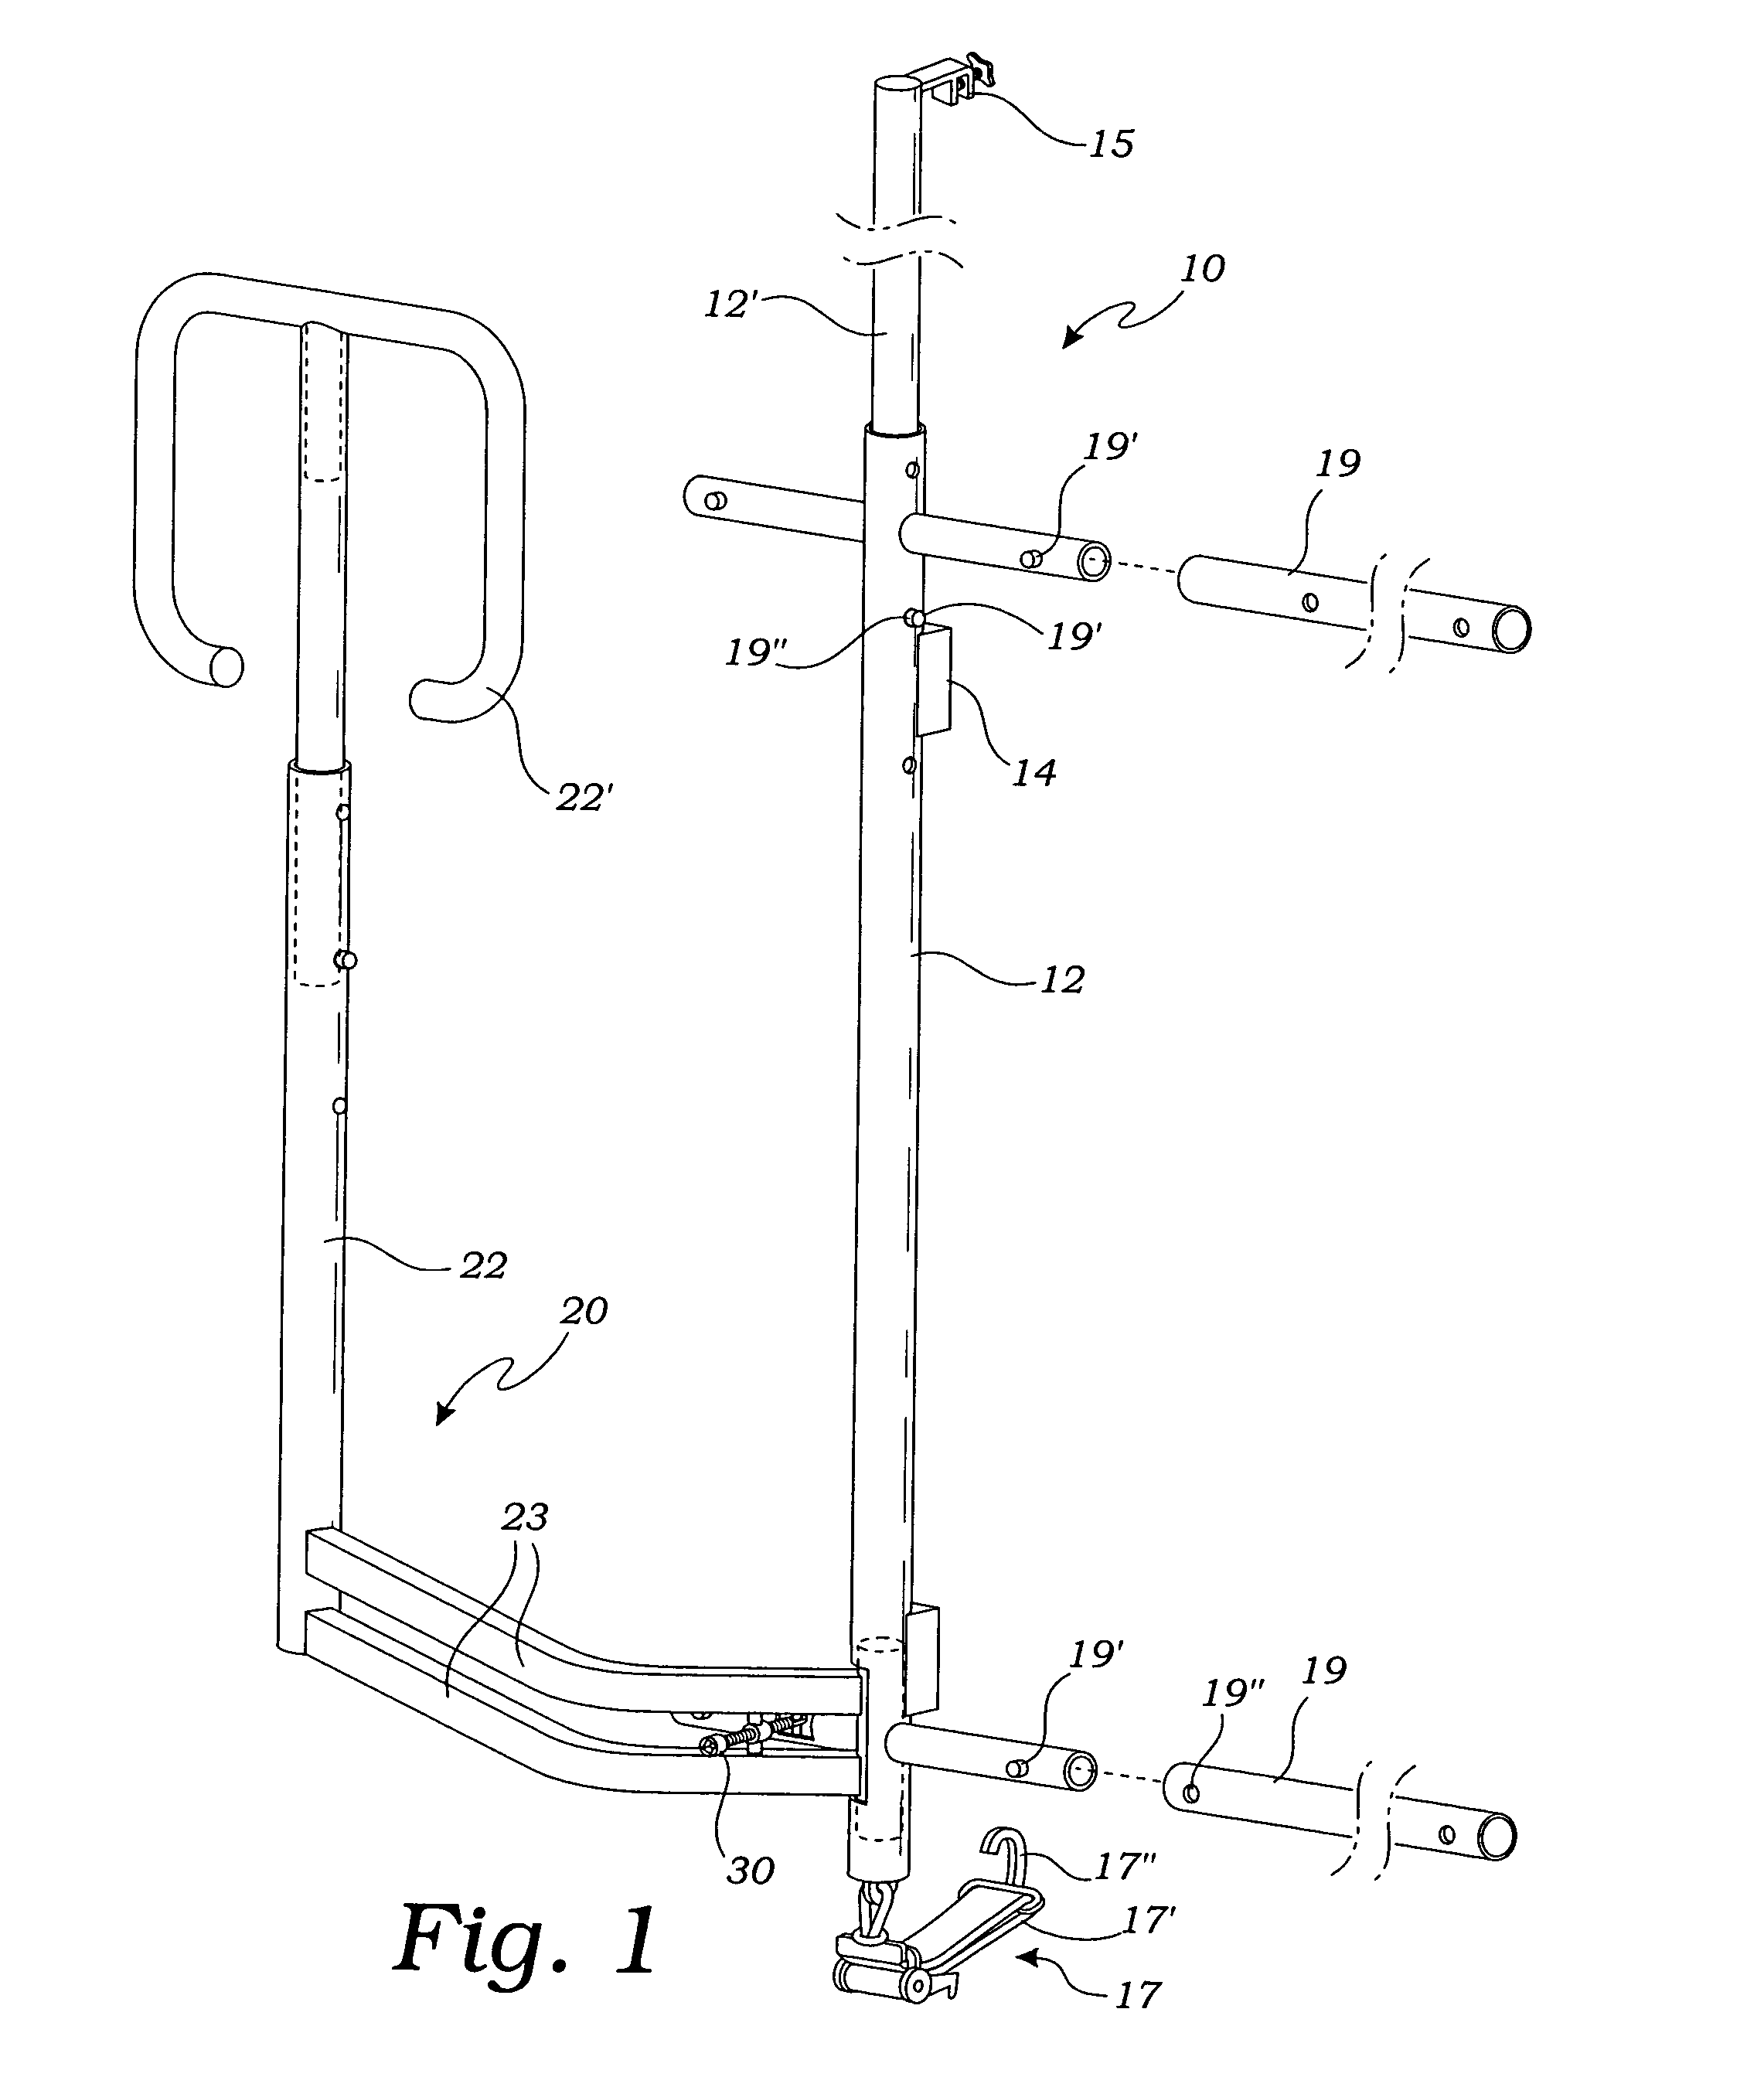 Vehicle exterior material clamping apparatus with scissors-like closure motion